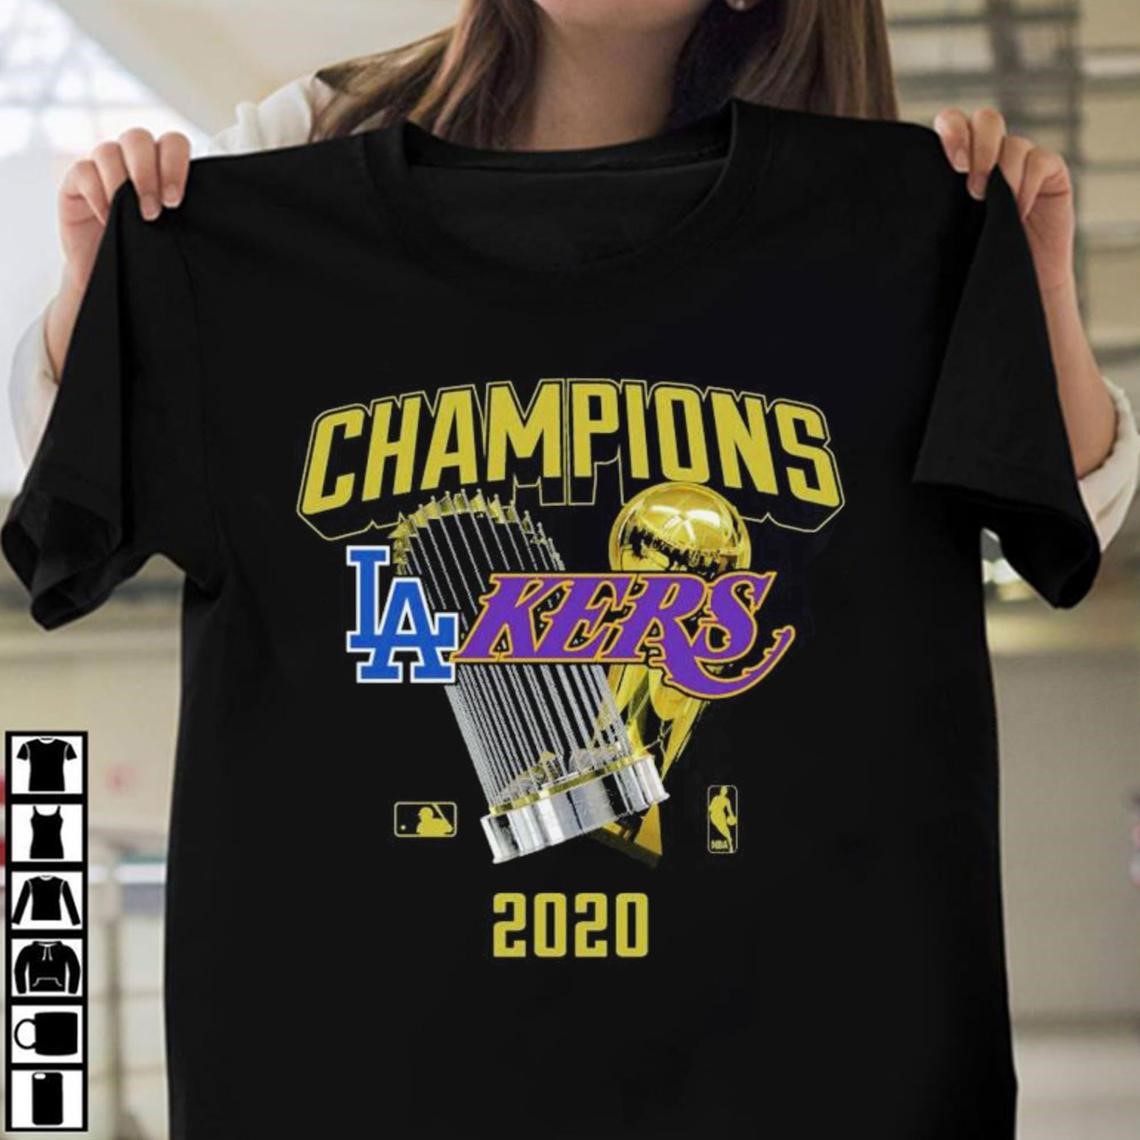 Los Angeles Dodgers Lakers 2020 World Champions Trophies Shirt 2020 World Champions Trophies